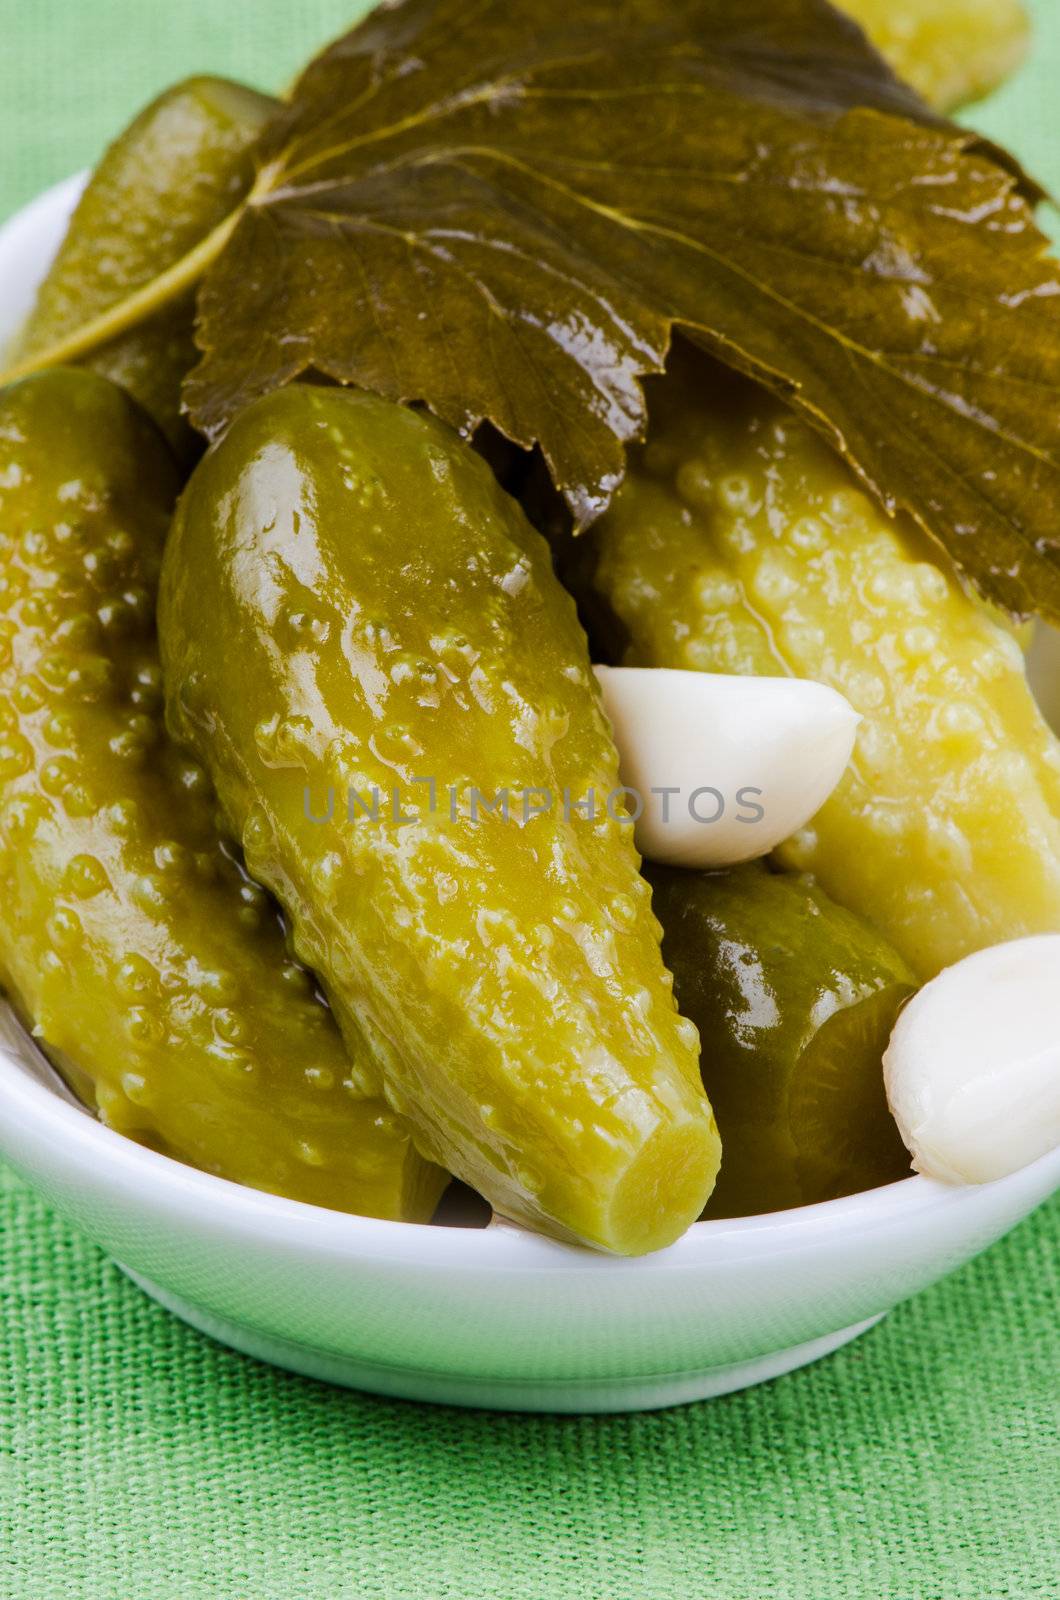 Pickles in bowl on green napkin close up